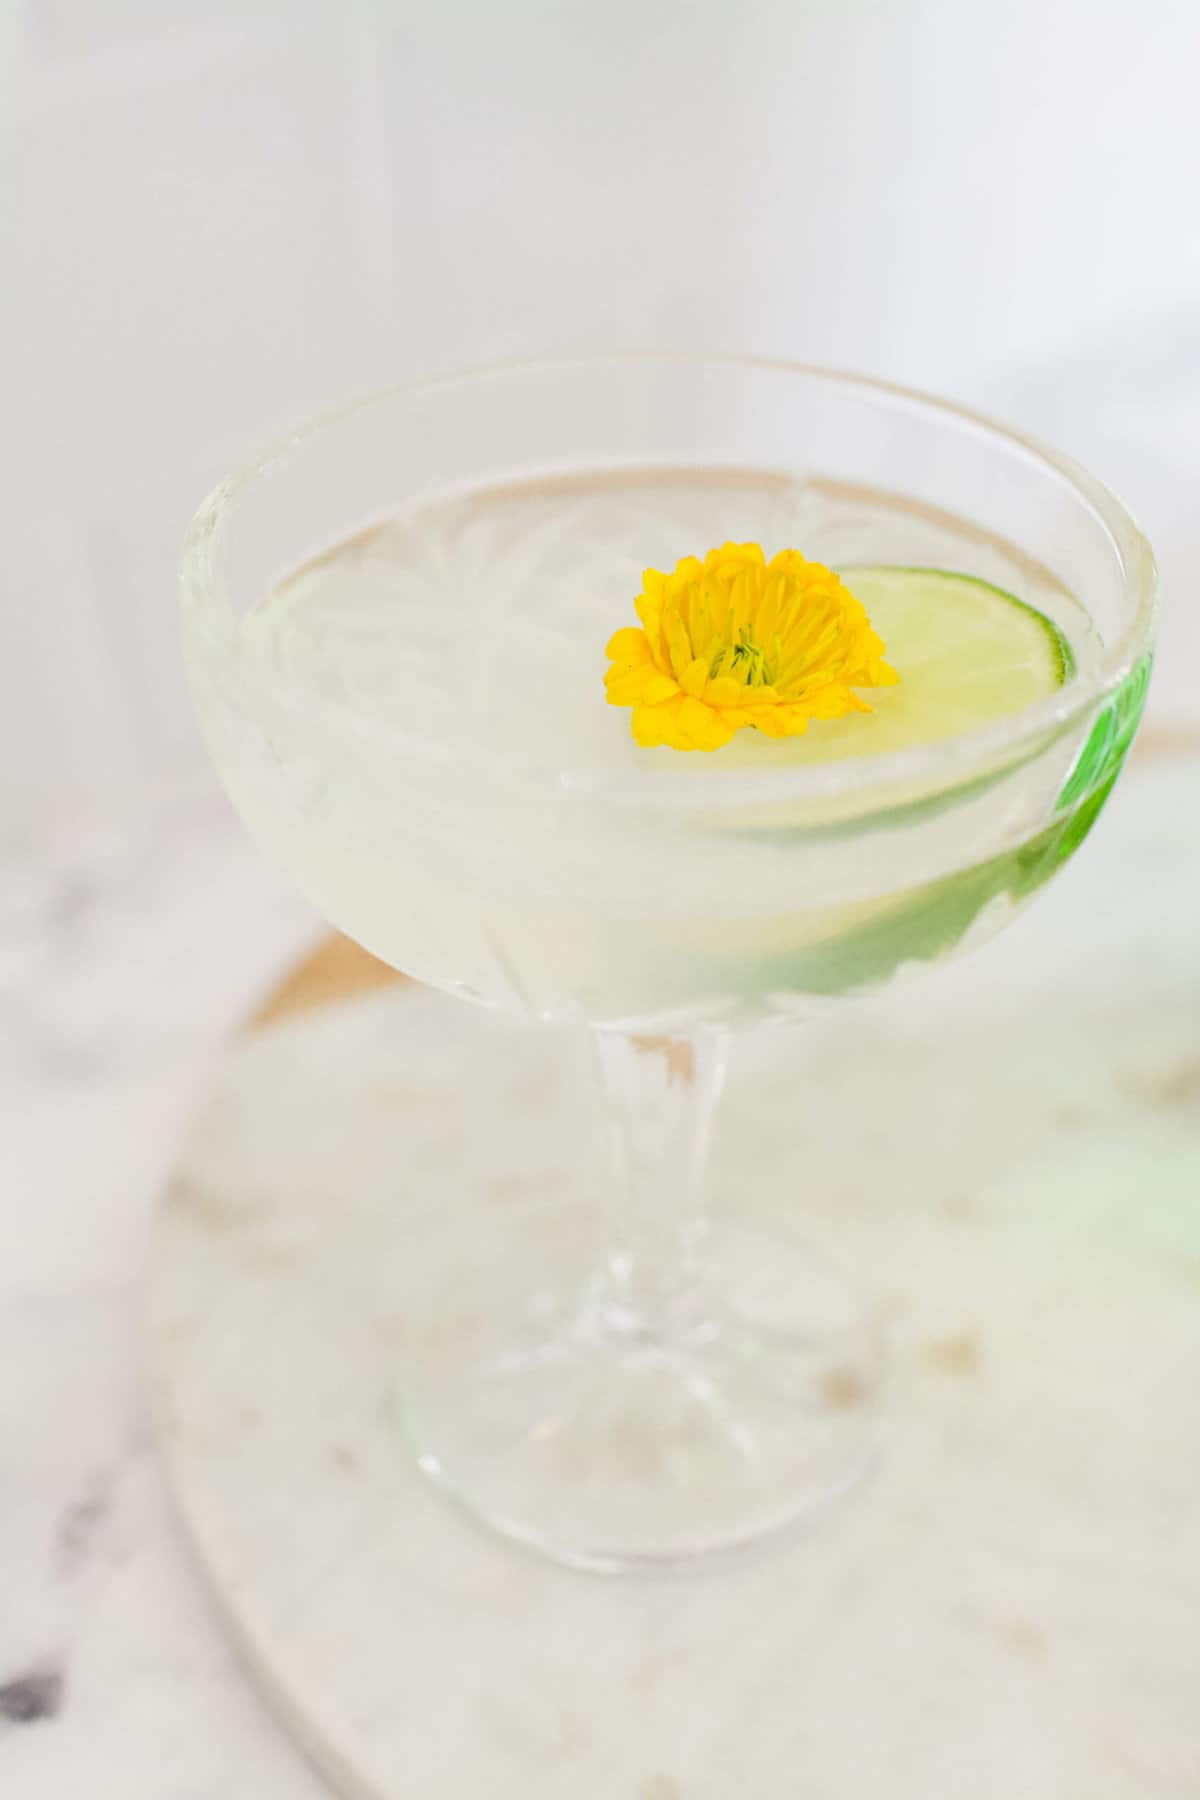 Gin gimlet in a coupe glass garnished with a lime wheel and a yellow edible flower.